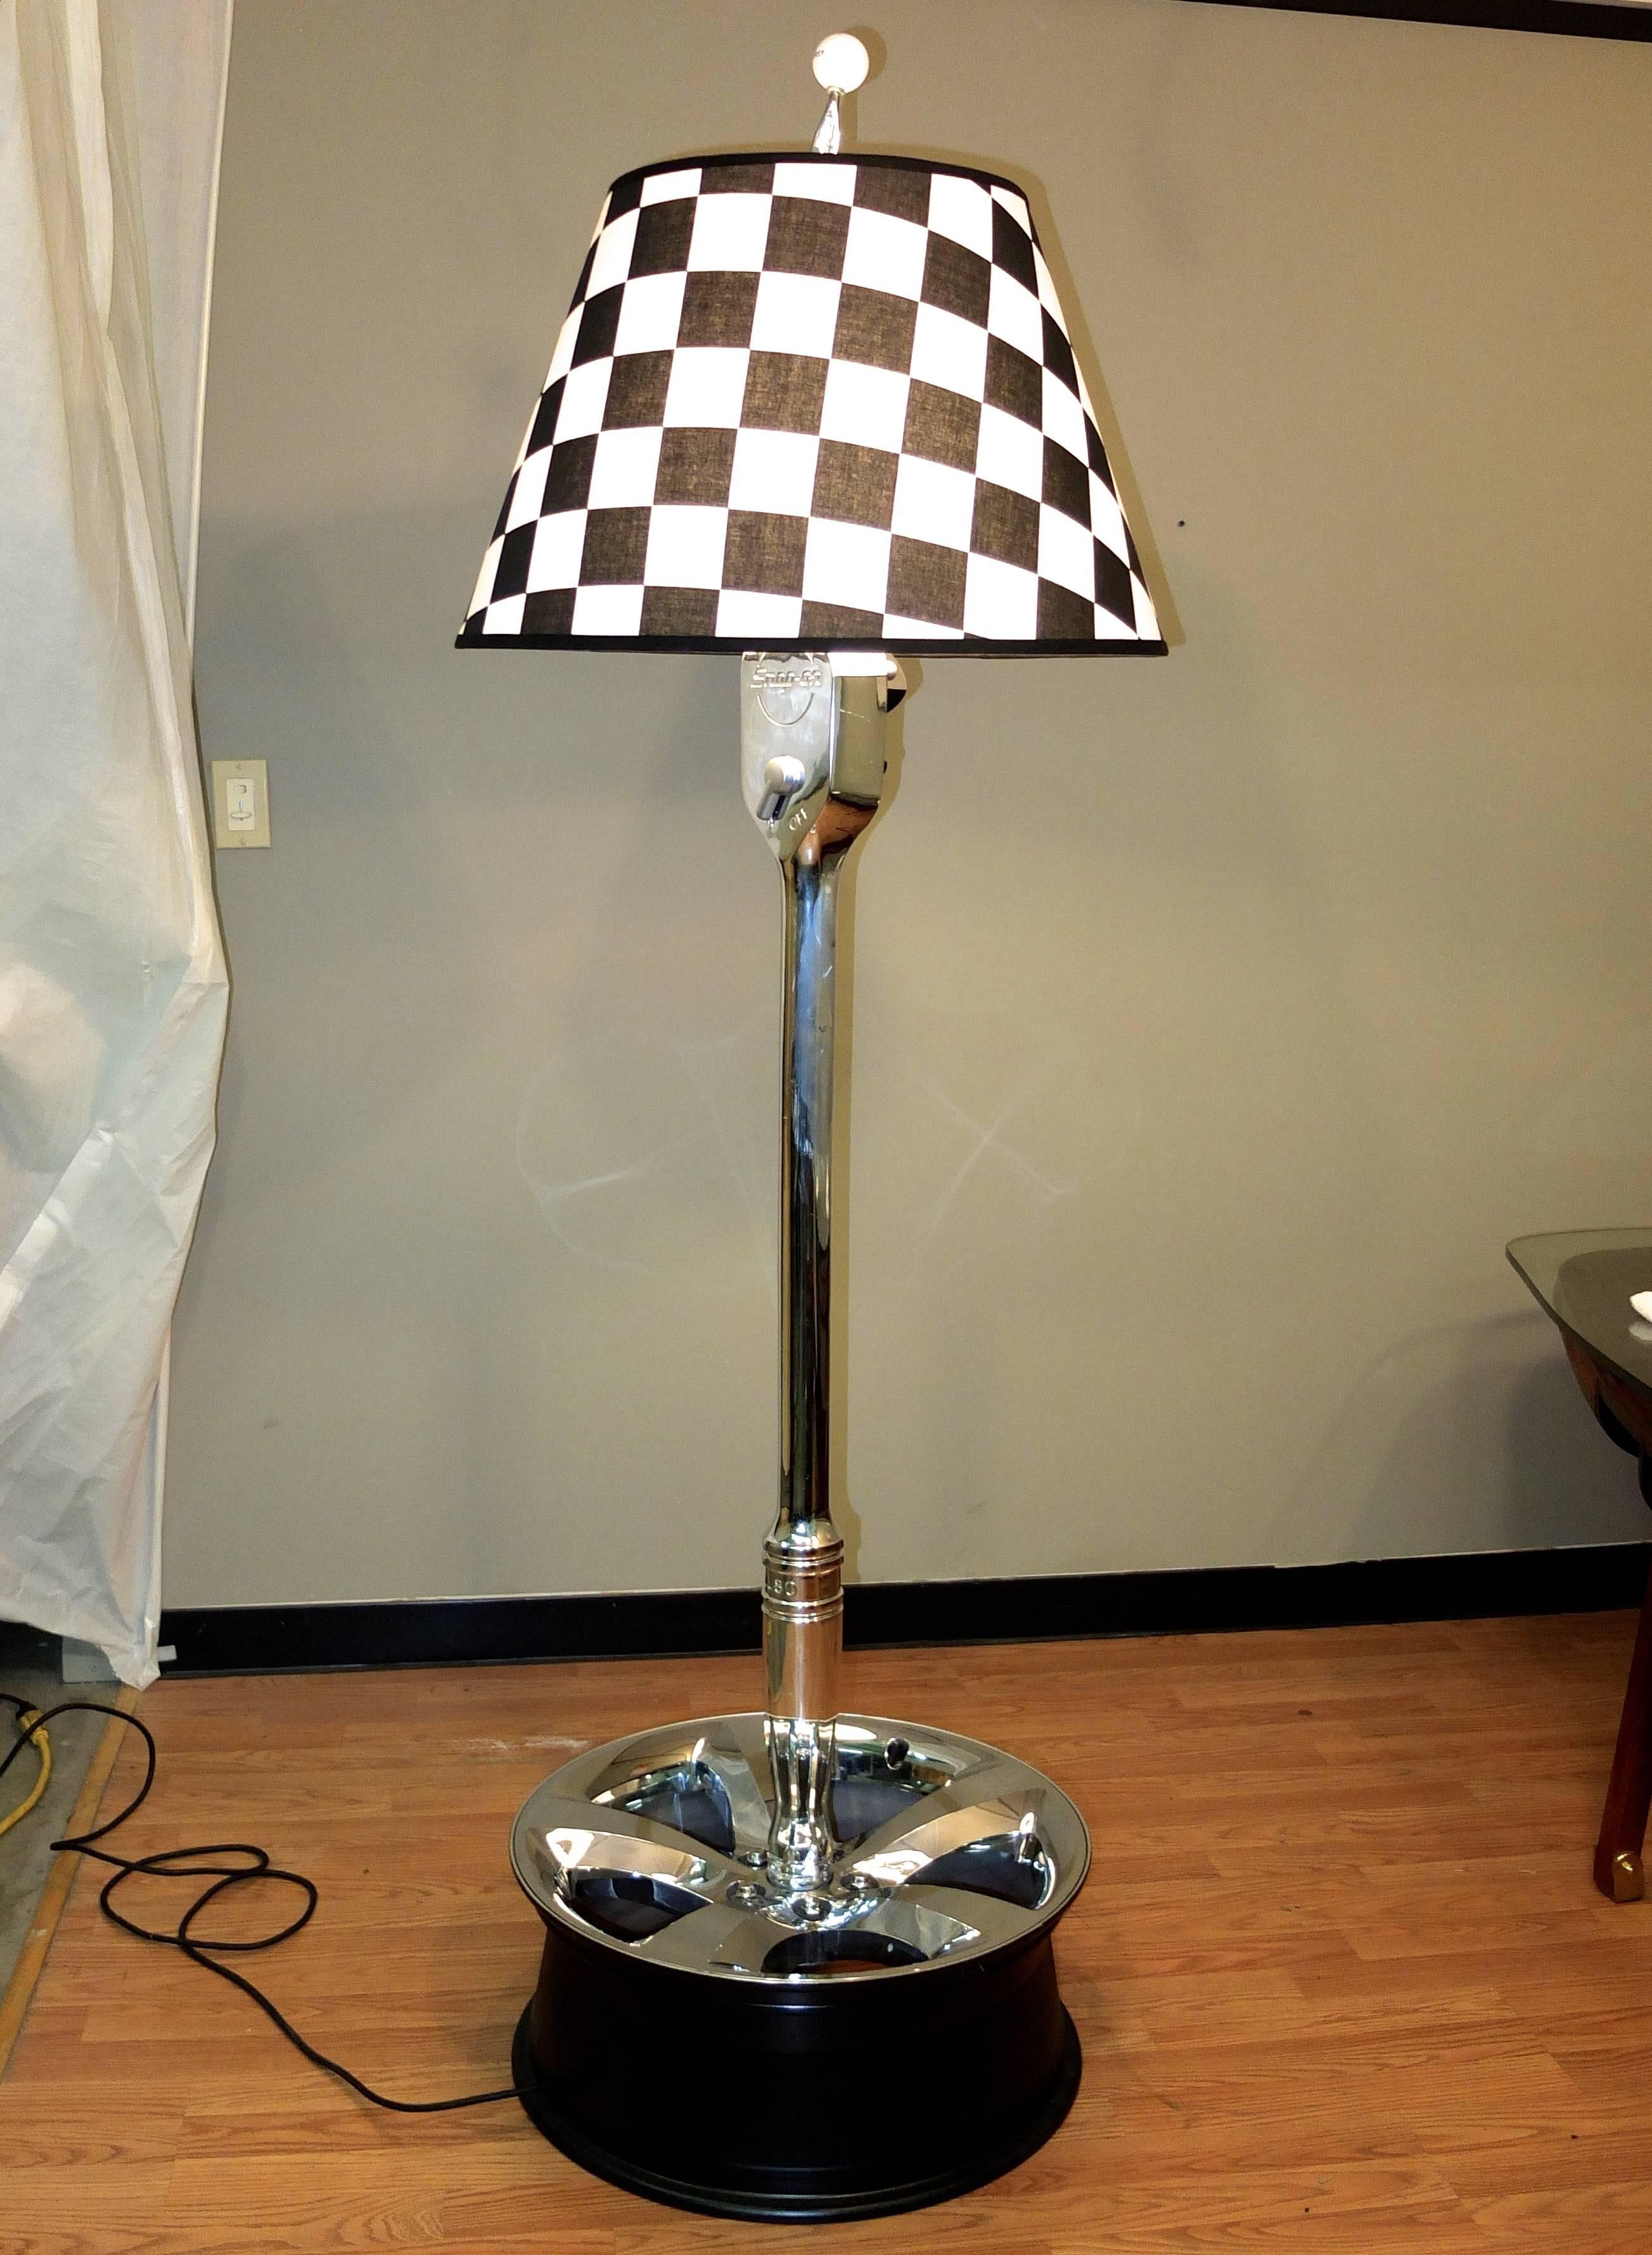 The inspiration behind this floor lamp was the discovery of a vintage giant Snap-On ratchet wrench promotional advertising display prop in pristine vintage condition. 

When setting about to convert this found object into a floor lamp the our